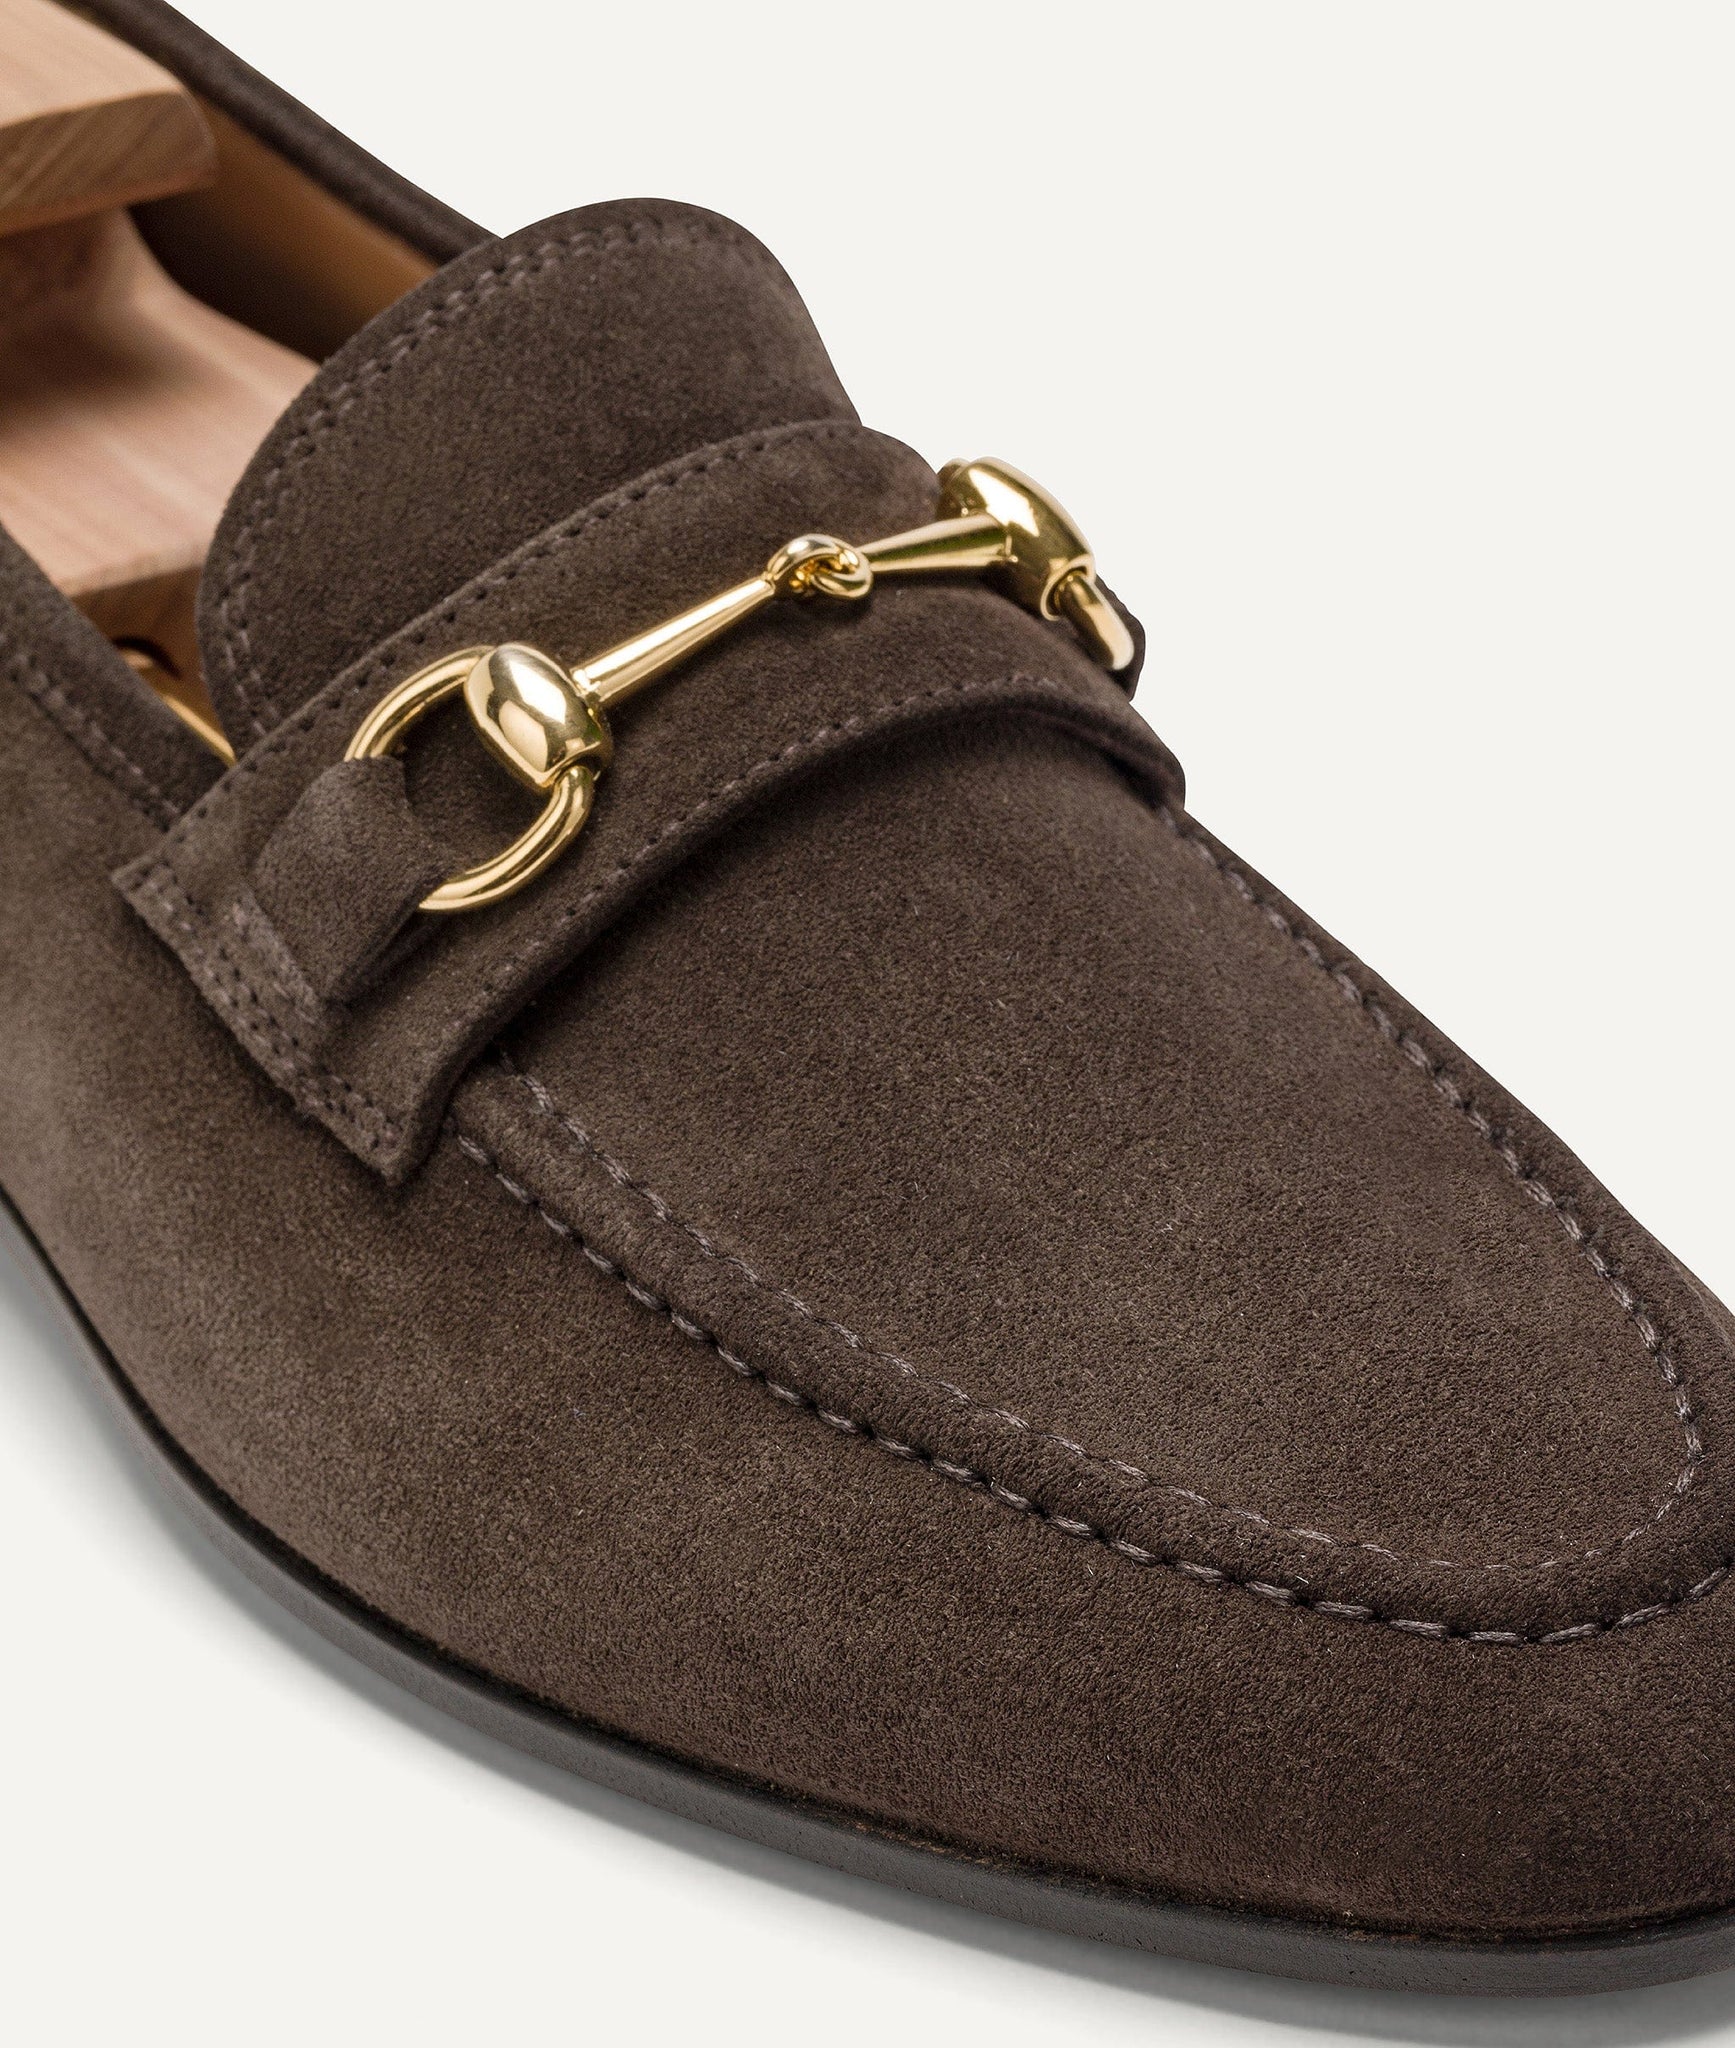 Chain Loafer in Suede Leather